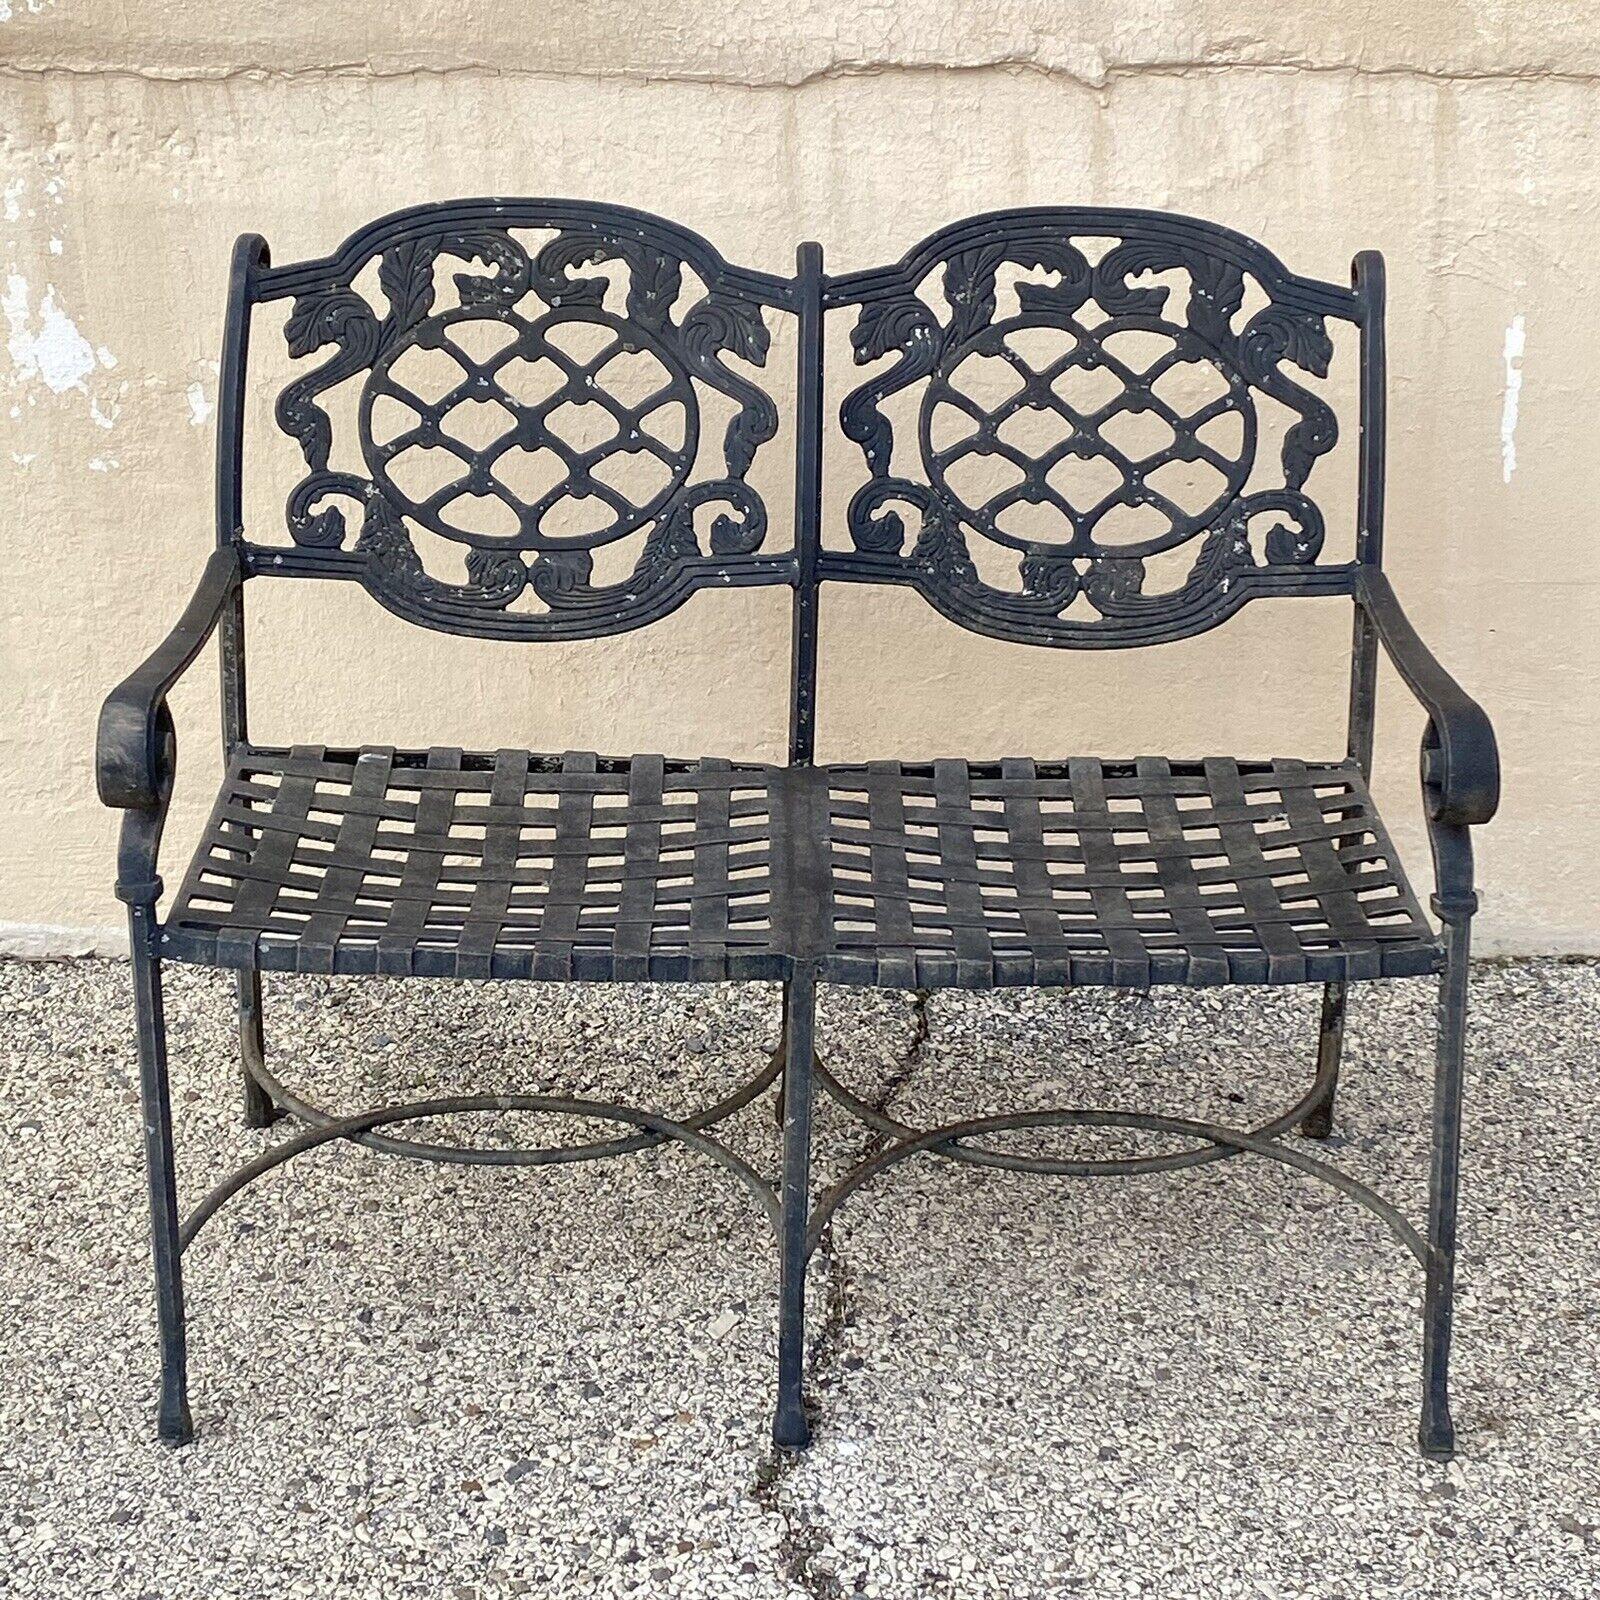 Tuscan Mediterranean Style Cast Aluminum Garden Patio Settee Loveseat. Item featured is 21st Century, Pre-owned. Measurements: 34